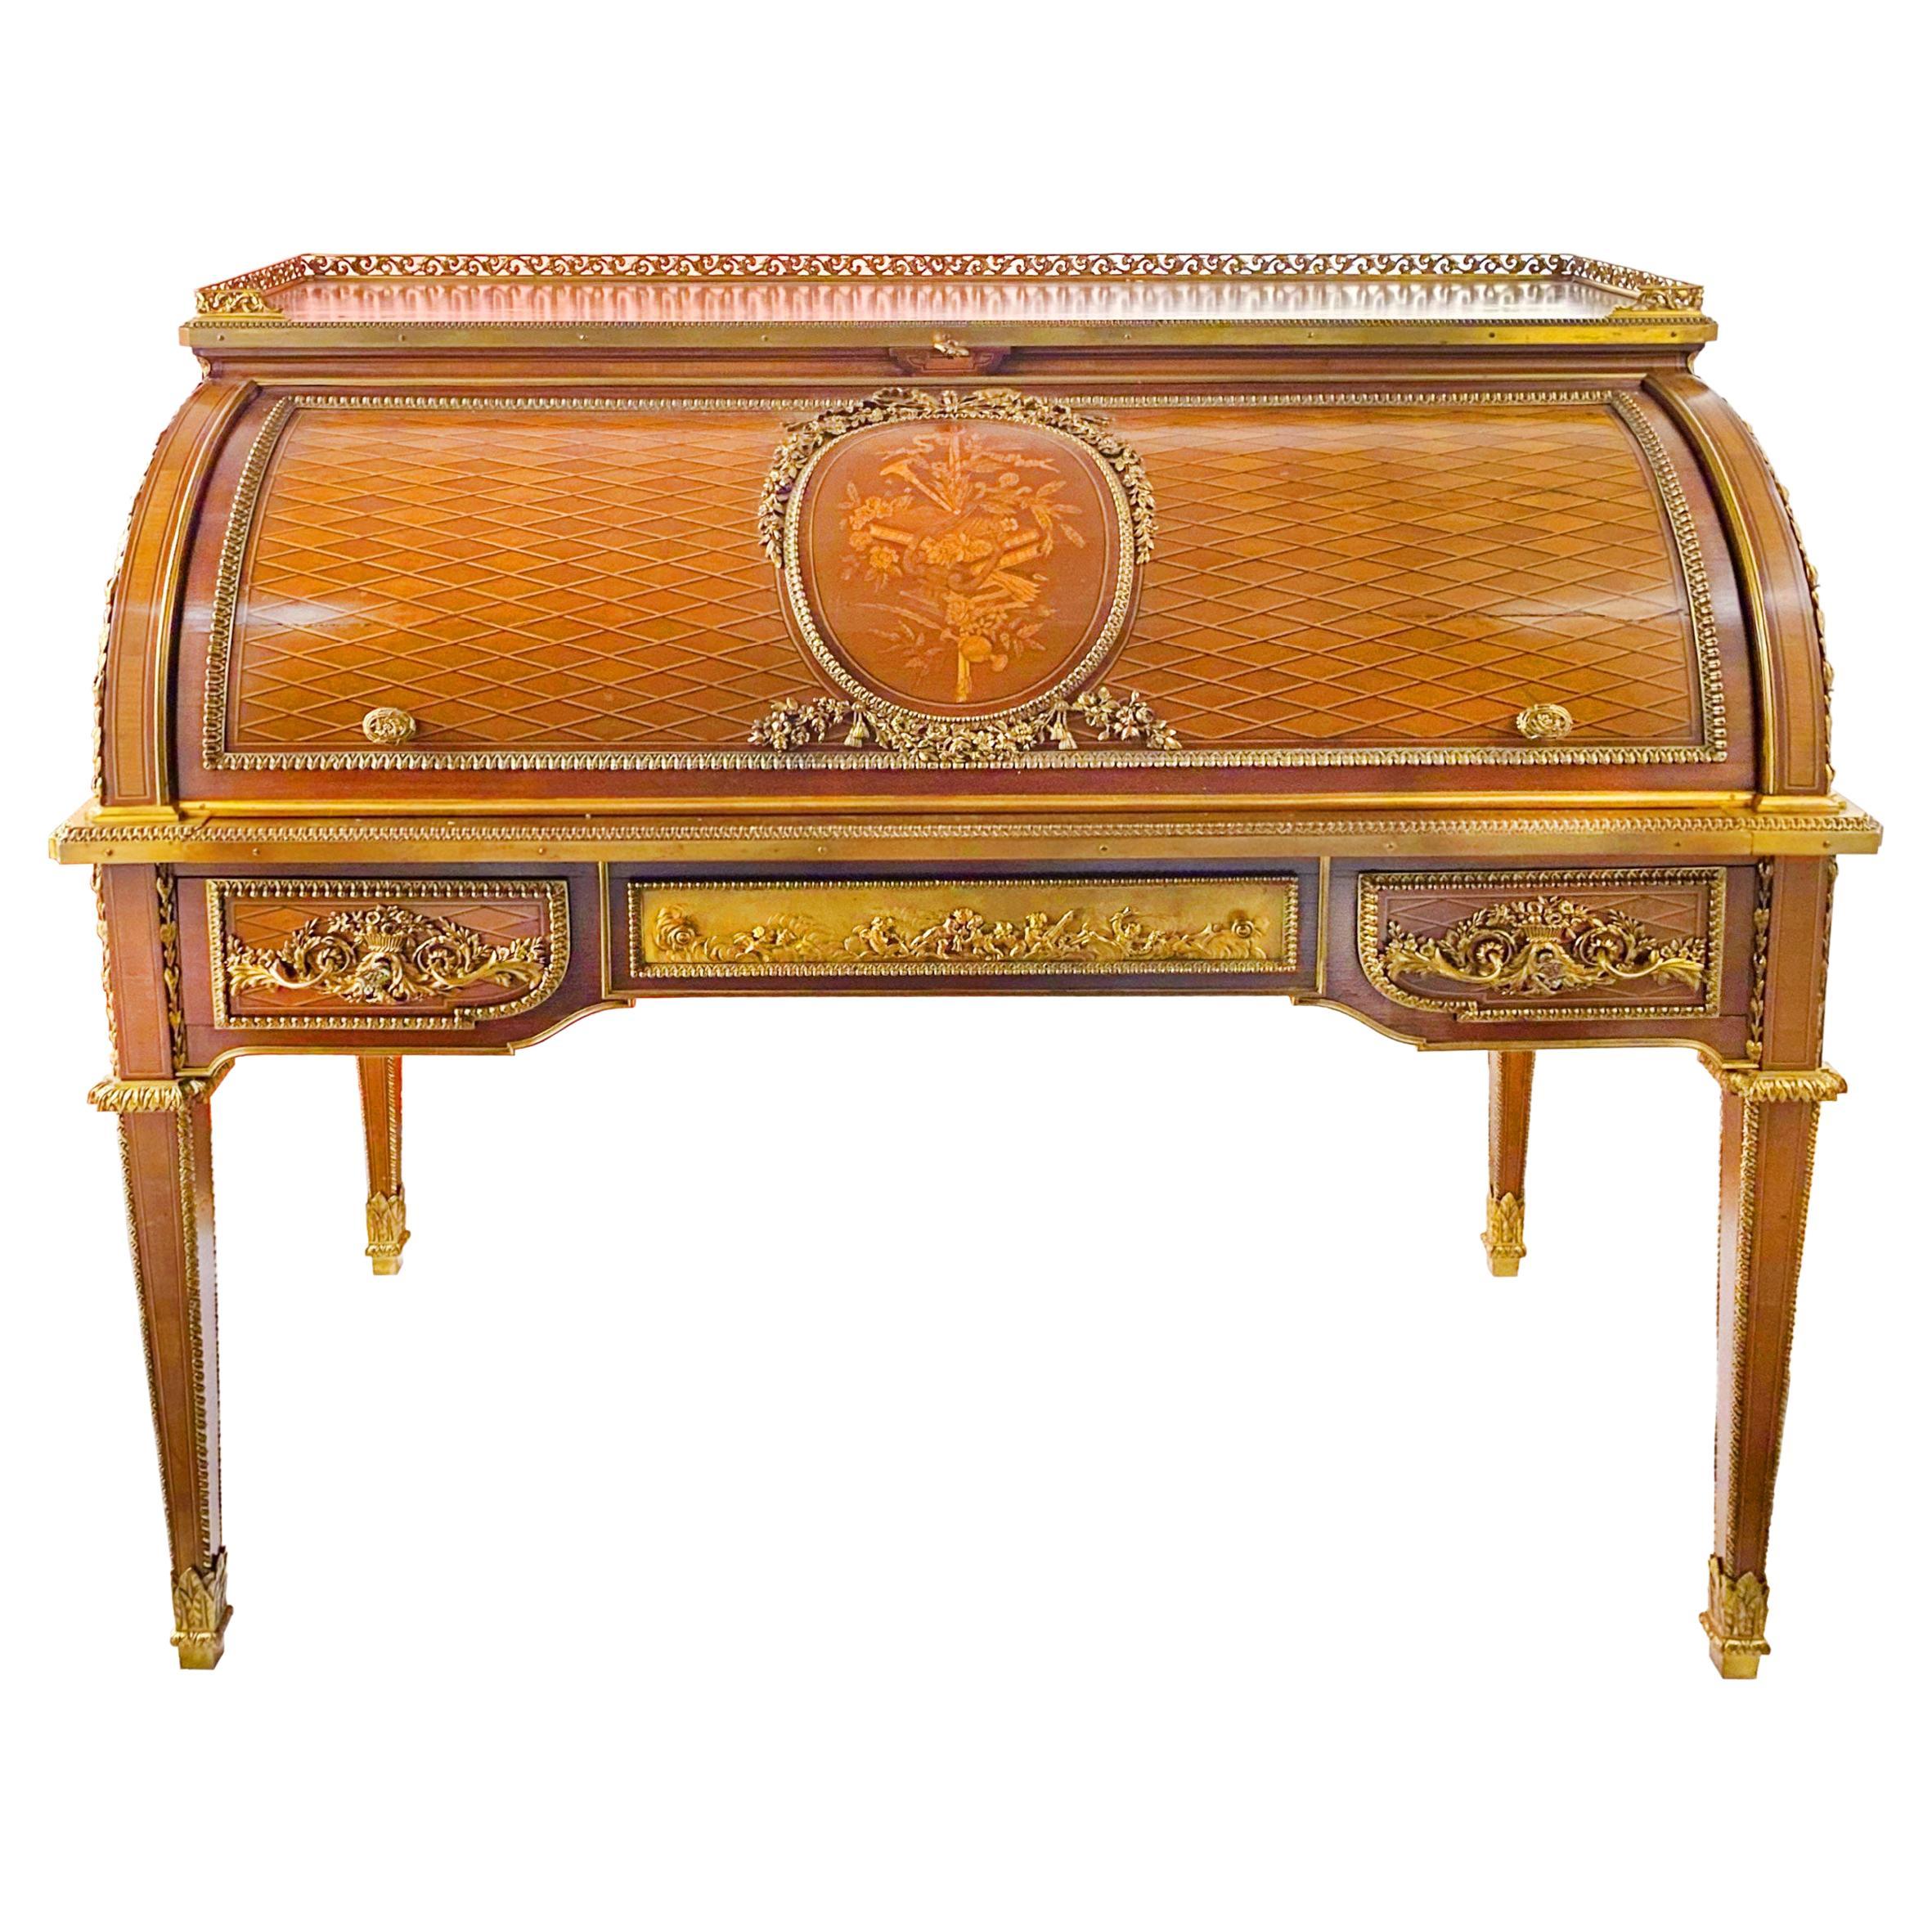 19th Century French Ormolu-Mounted Rolltop Desk by Alfred Beurdeley For Sale